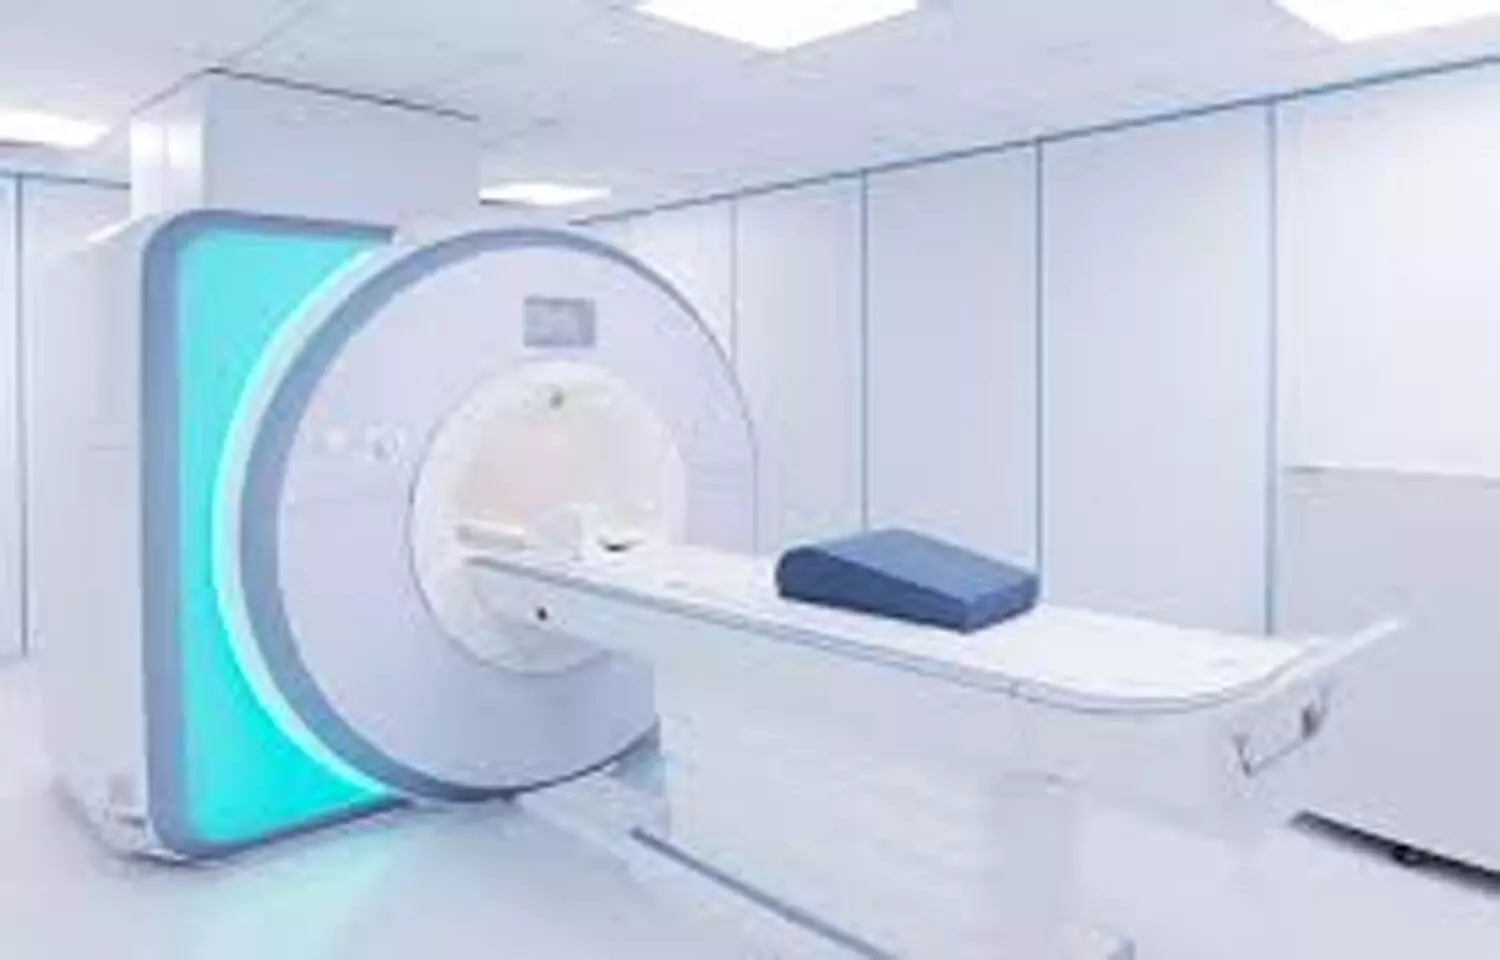 Whole body MRI may help detect myeloma earlier, finds study